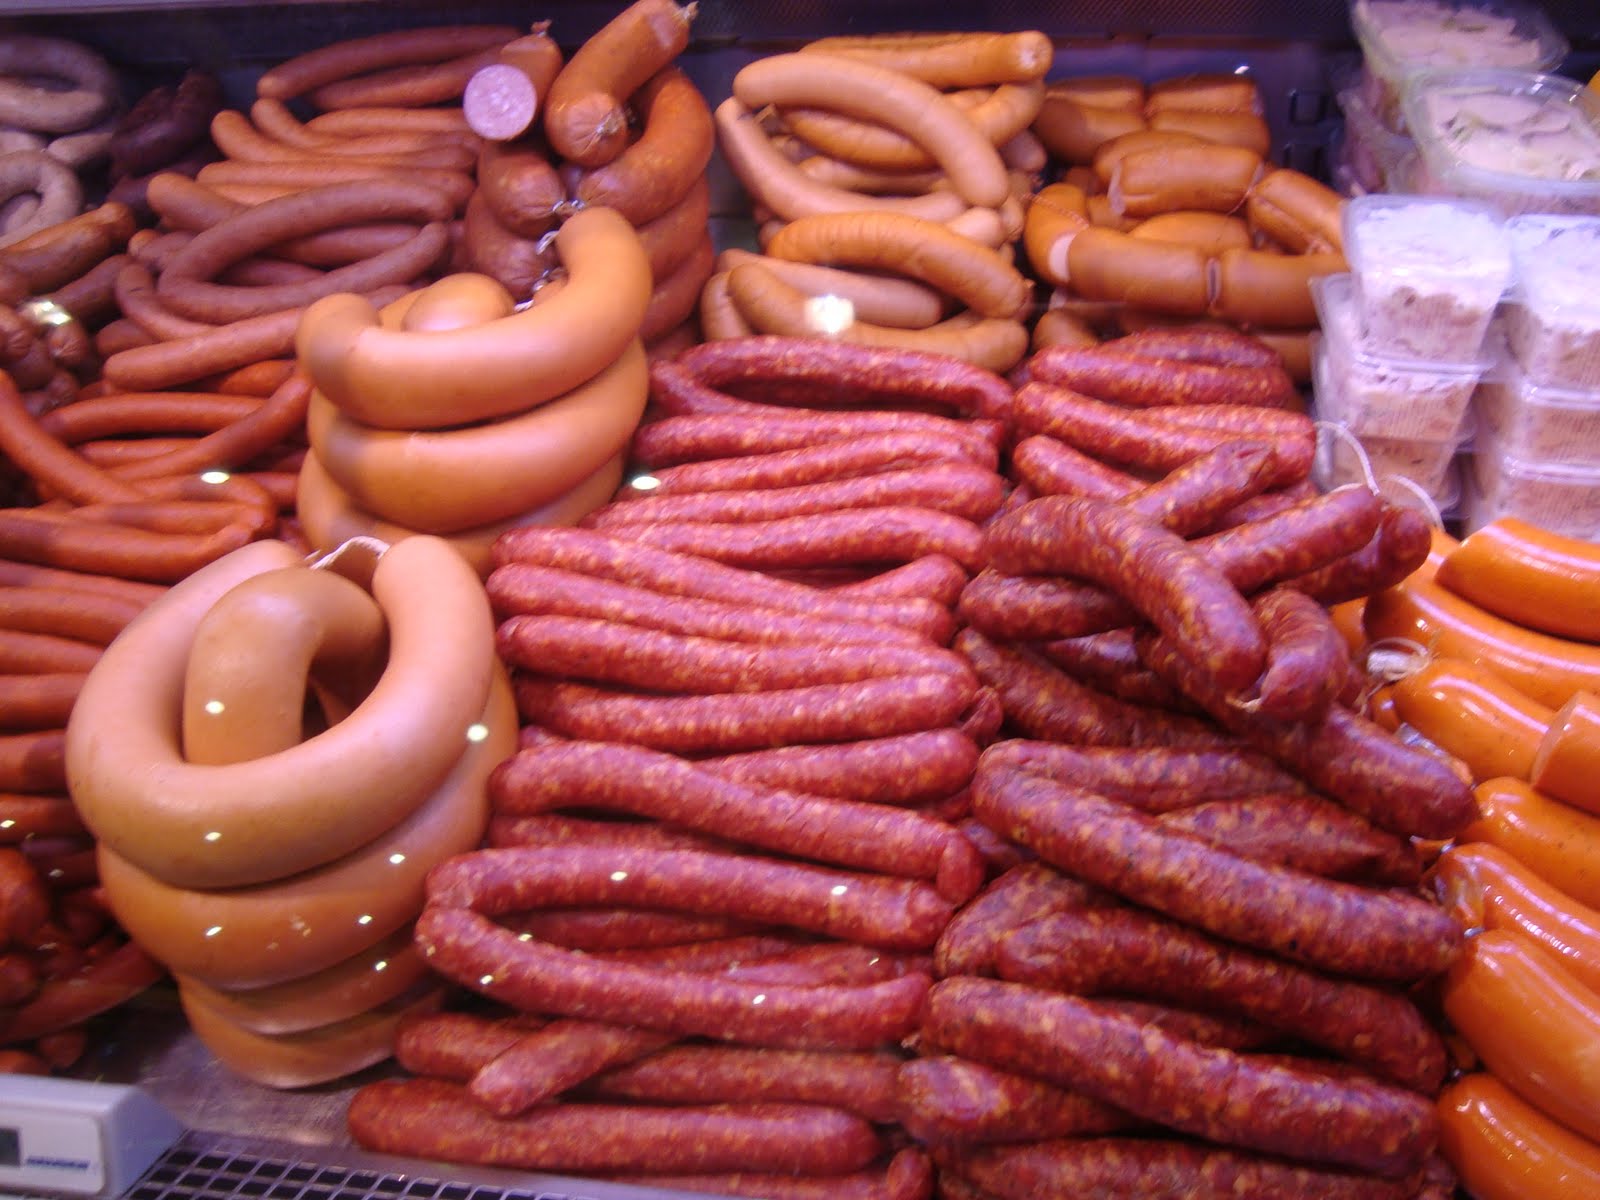 Travel and Explore Germany » Blog Archive » German Sausages